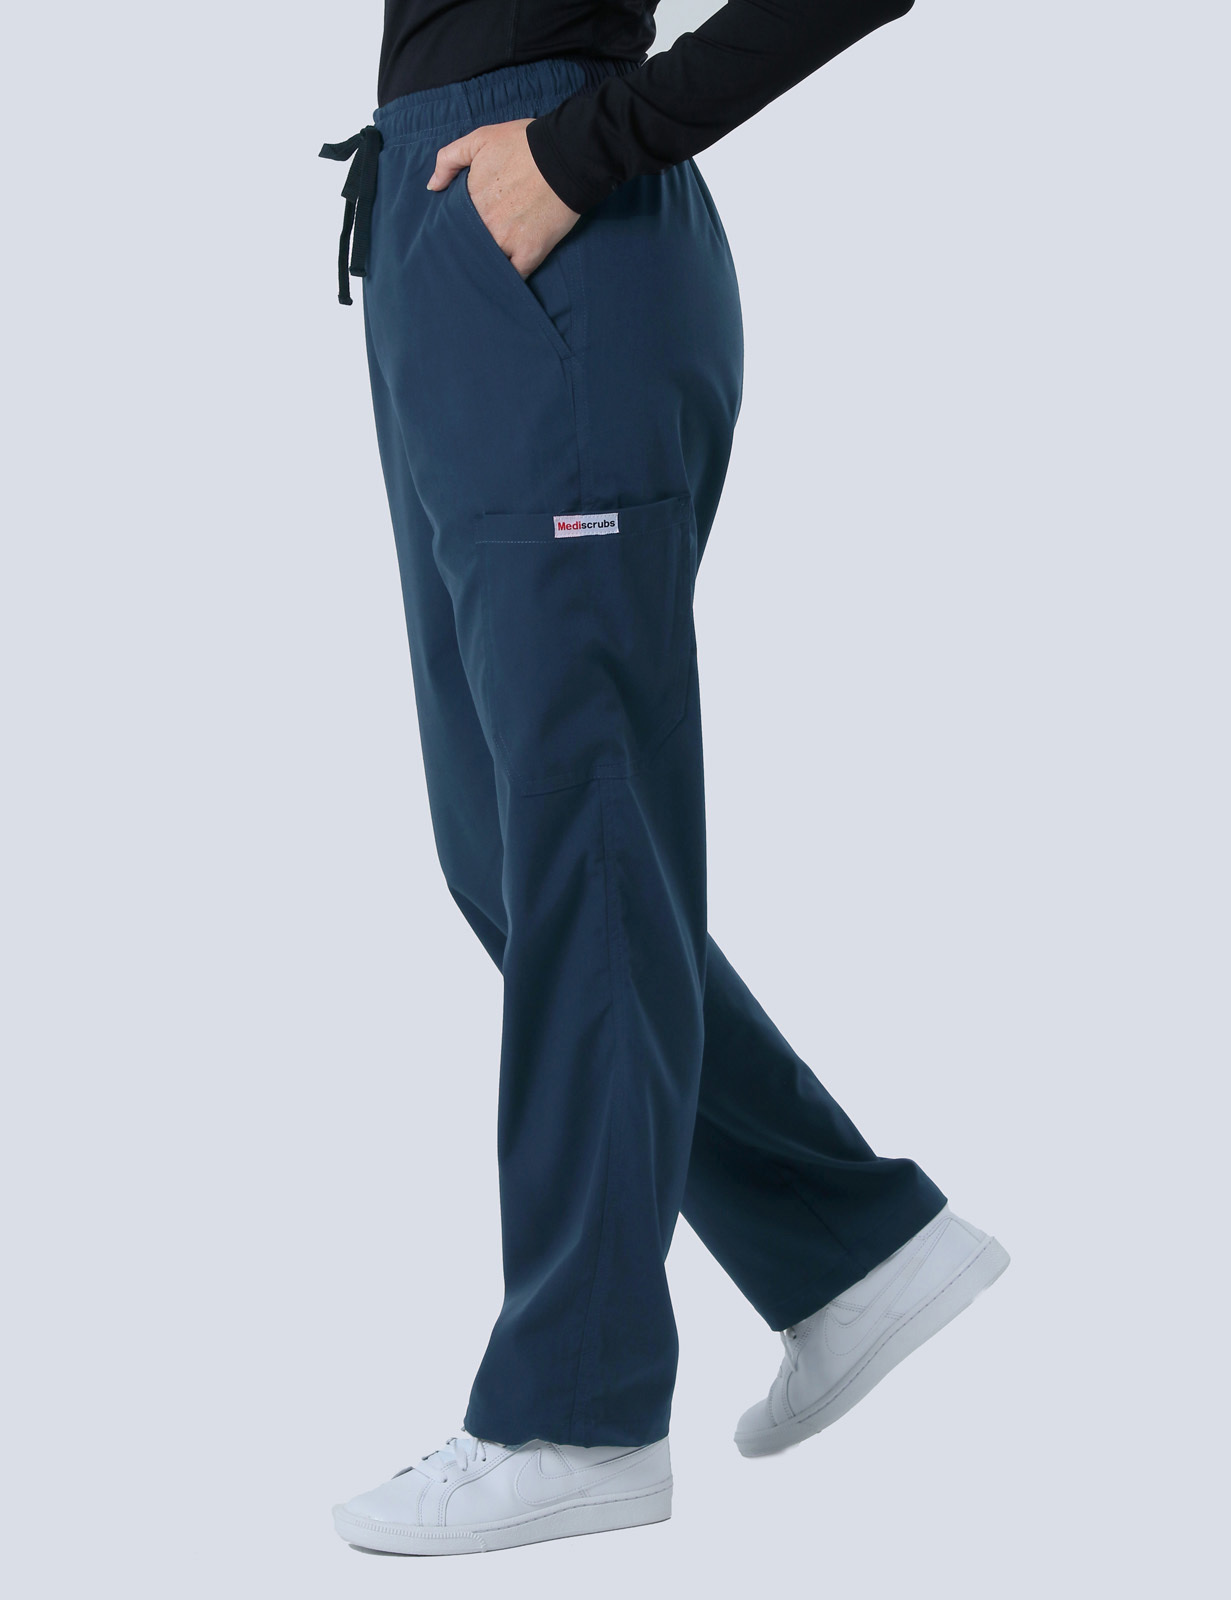 Frankston - AAAU/ANM (Women's Fit Solid Scrub Top and Cargo Pants in Navy incl Logos)